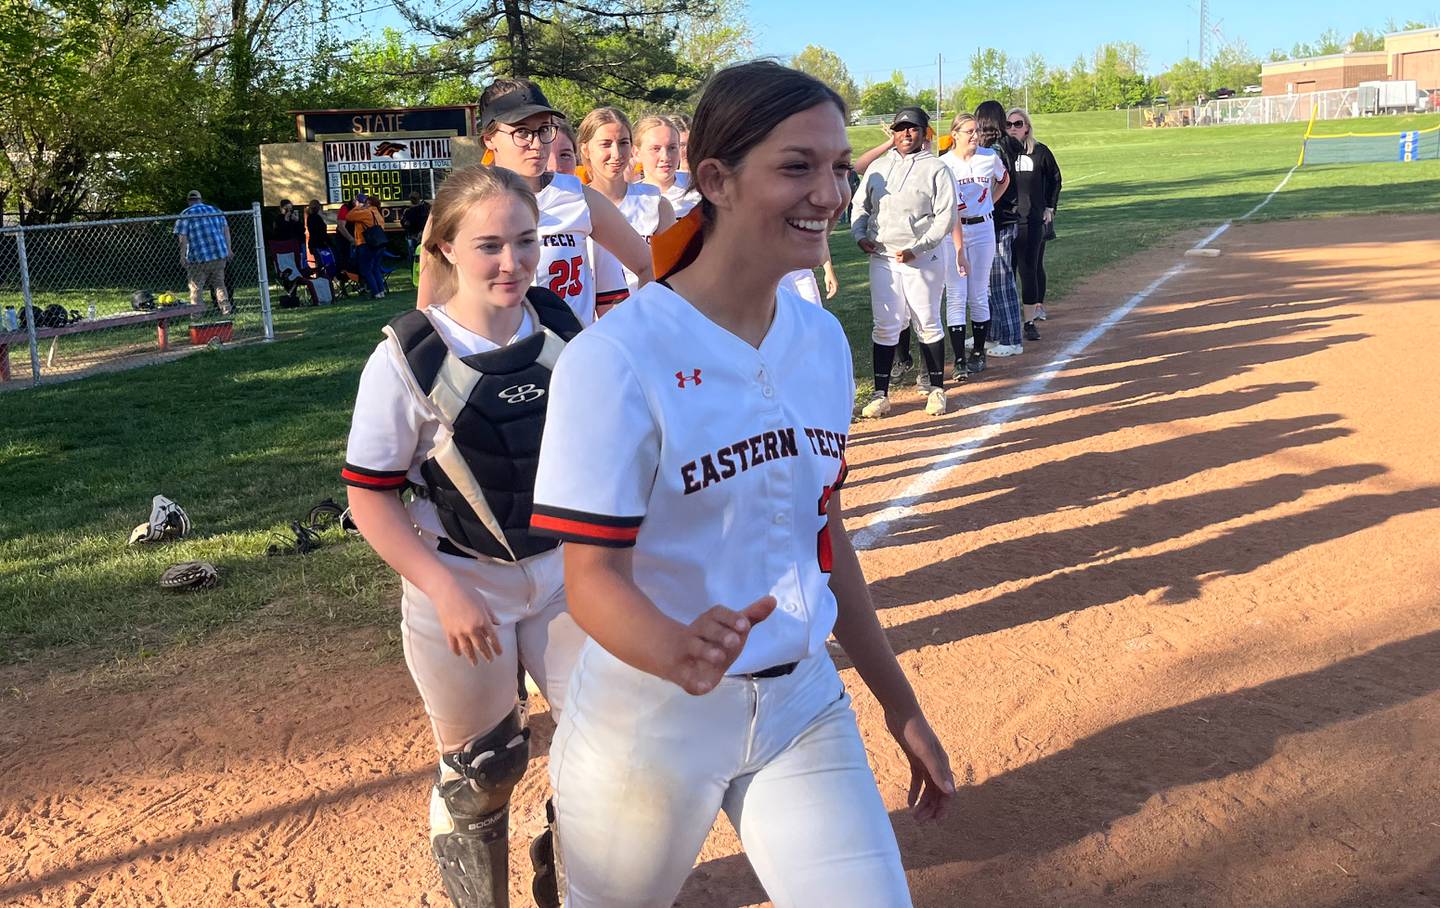 Malorie Gogel (front) leads Eastern Tech's line for postgame handshakes after Tuesday's victory over Catonsville. The No. 13 Mavericks improved to 8-1 with a 9-2 decision over the Comets in Essex.